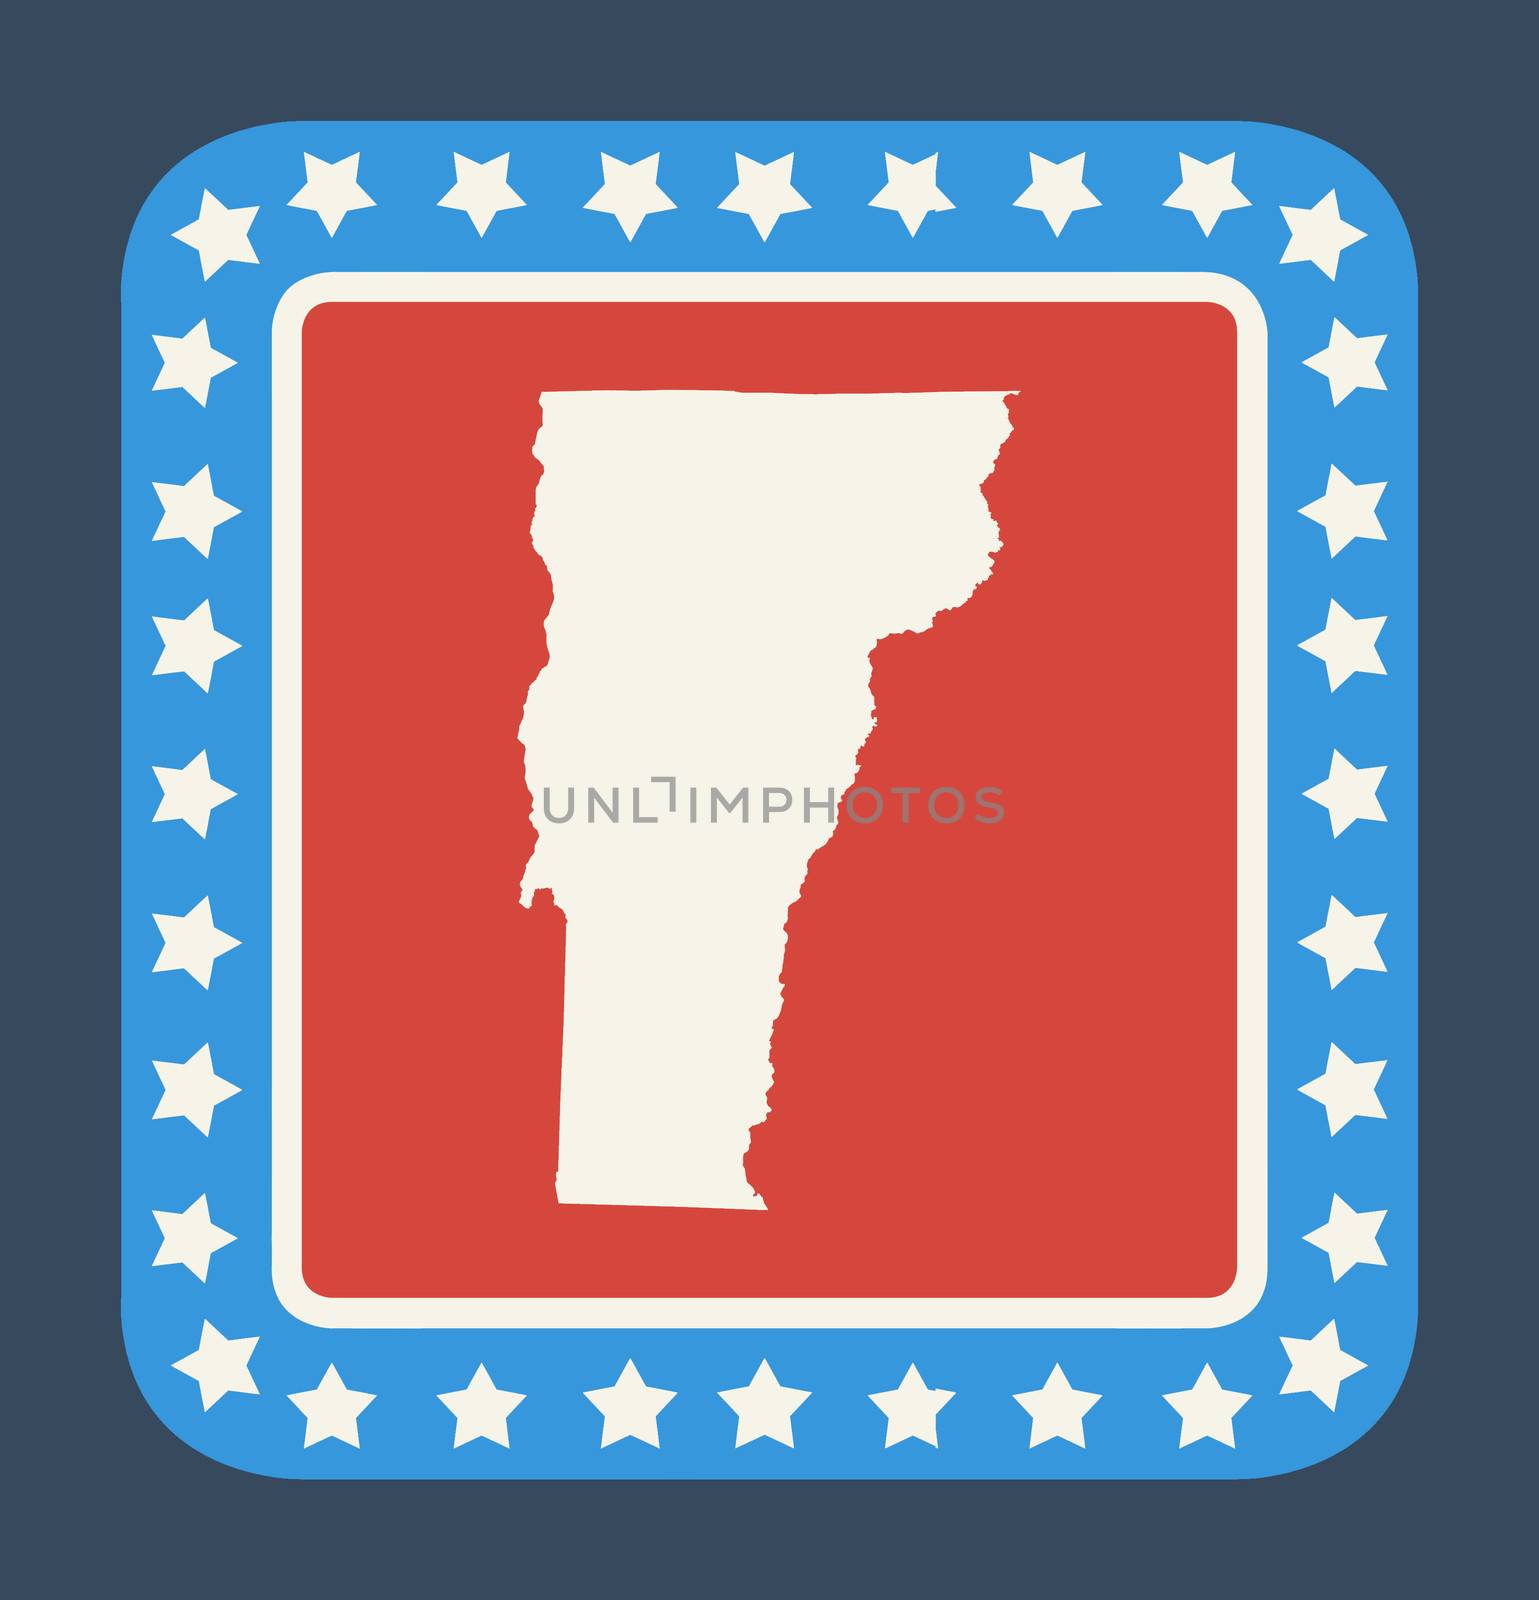 Vermont state button on American flag in flat web design style, isolated on white background.